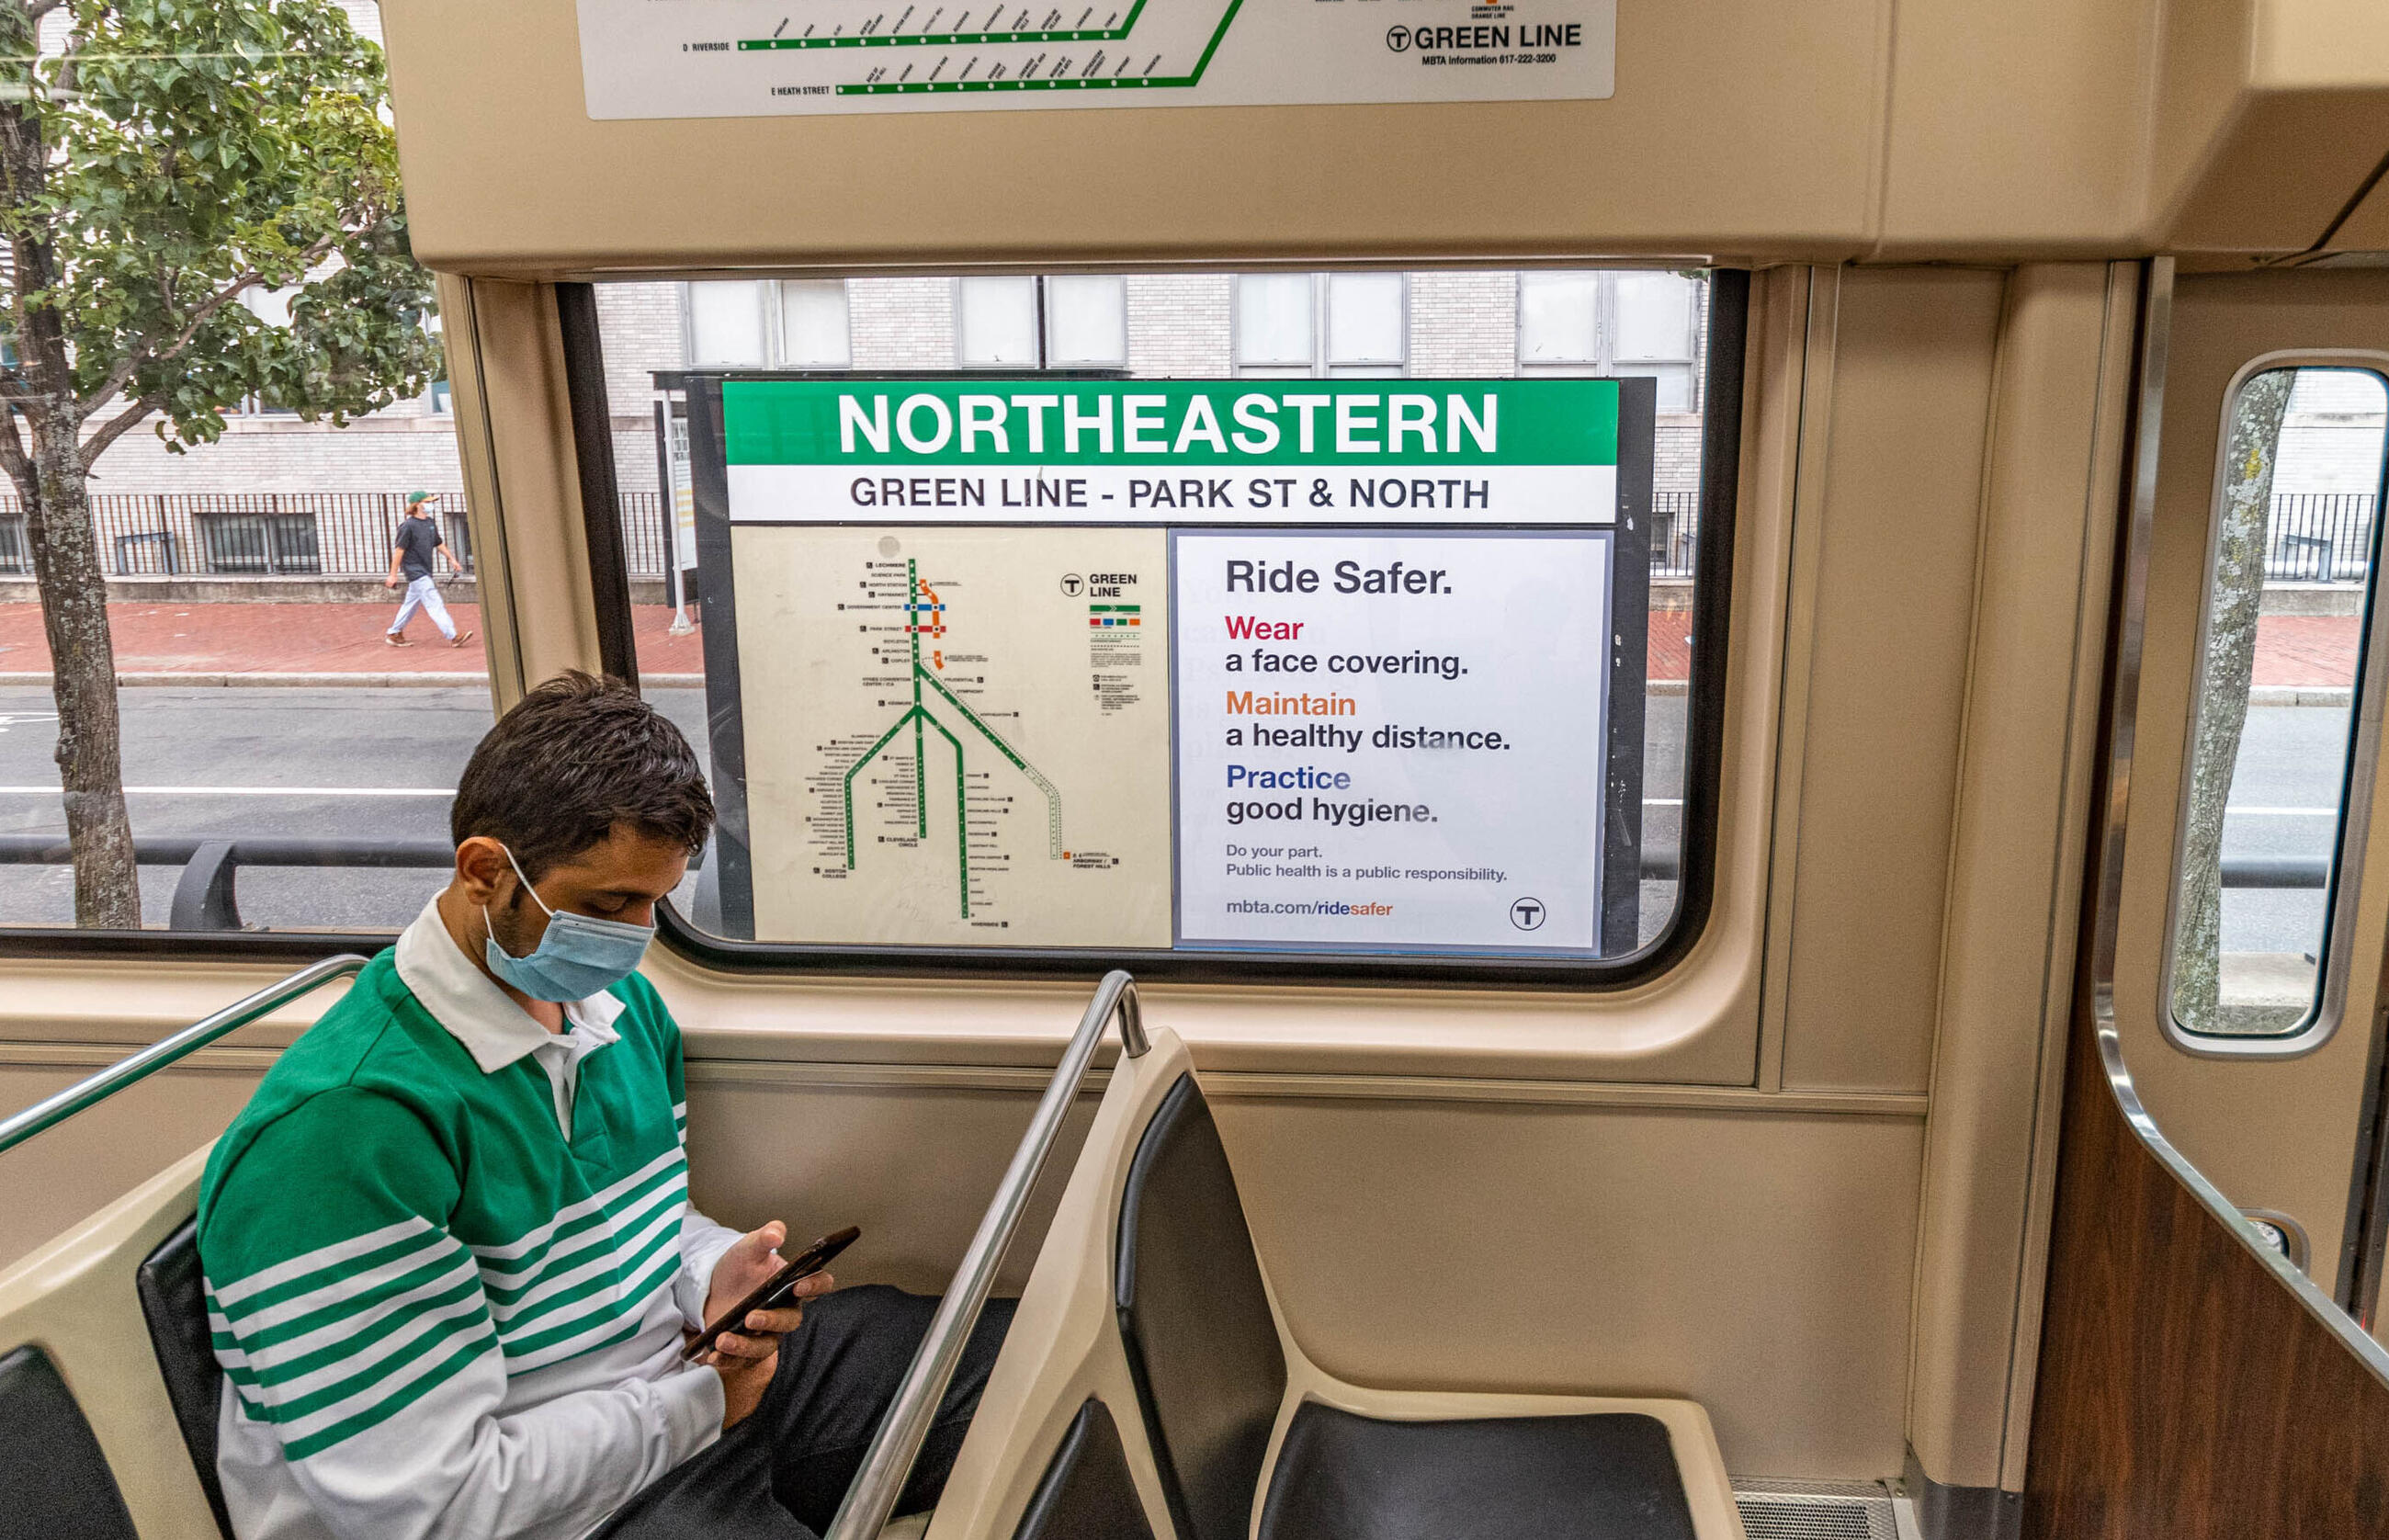 Person on the green line, with a Ride Safer sign in the background